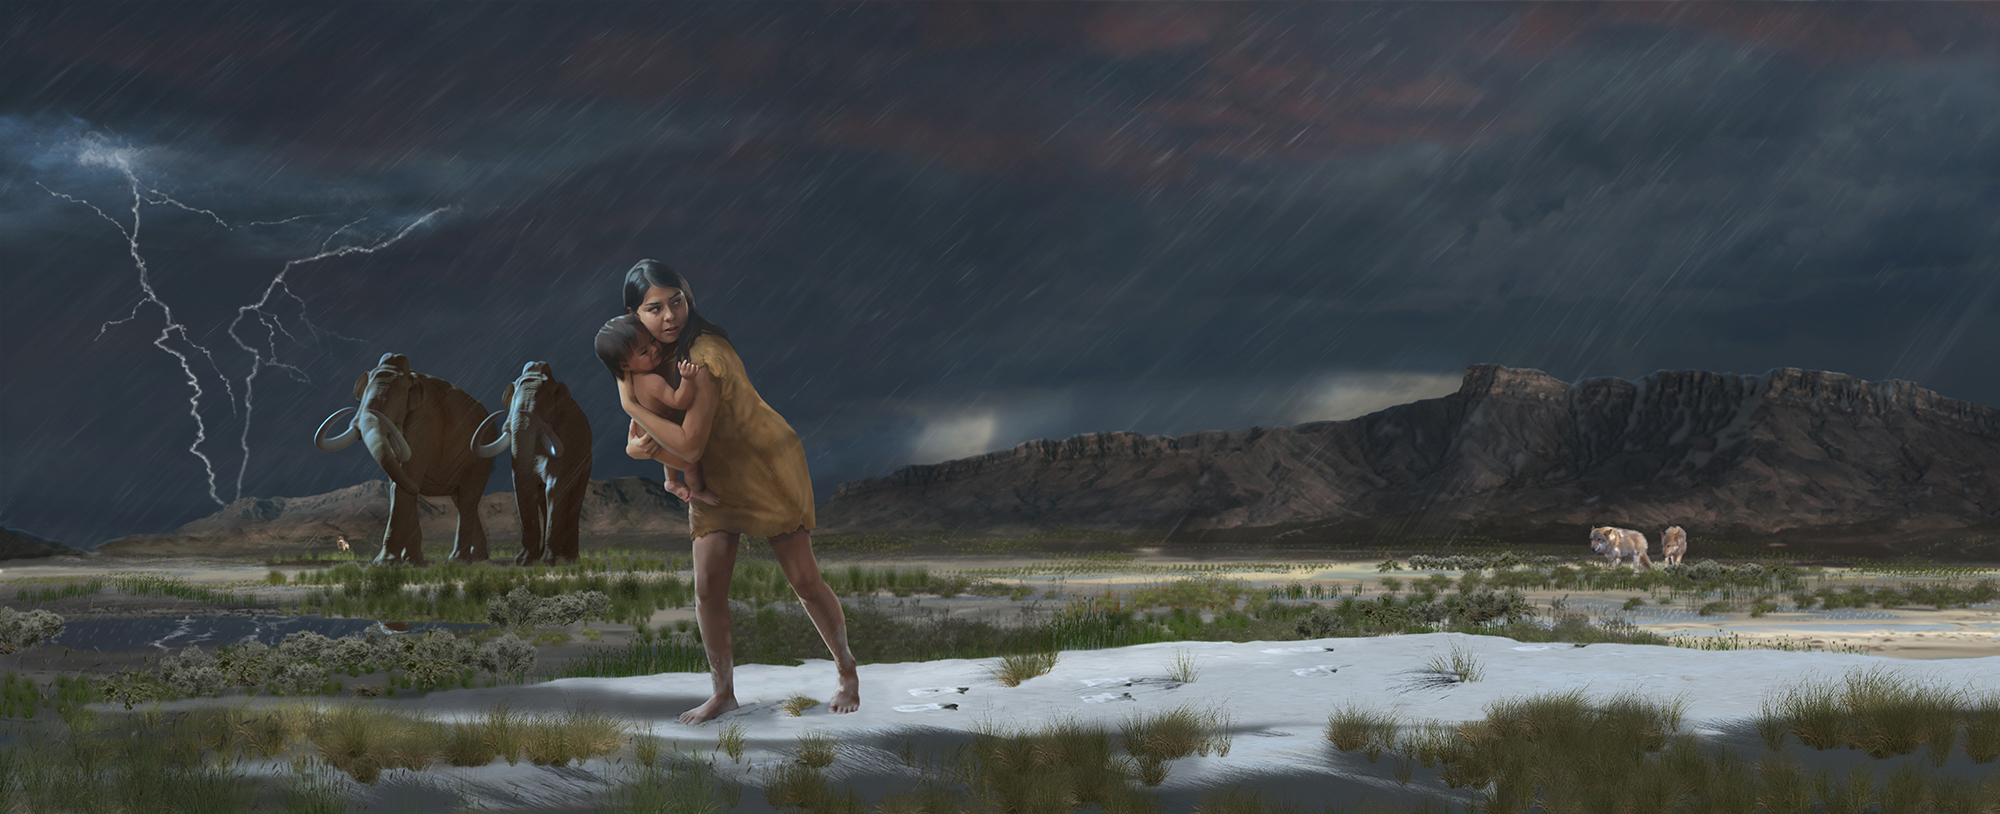 An artist's concept of one scenario reconstructed from White Sands footprints: a woman wearing a brown smock carrying a child across a marshy landscape in a thunderstorm. Two woolly mammoths and a large cat are in the background.